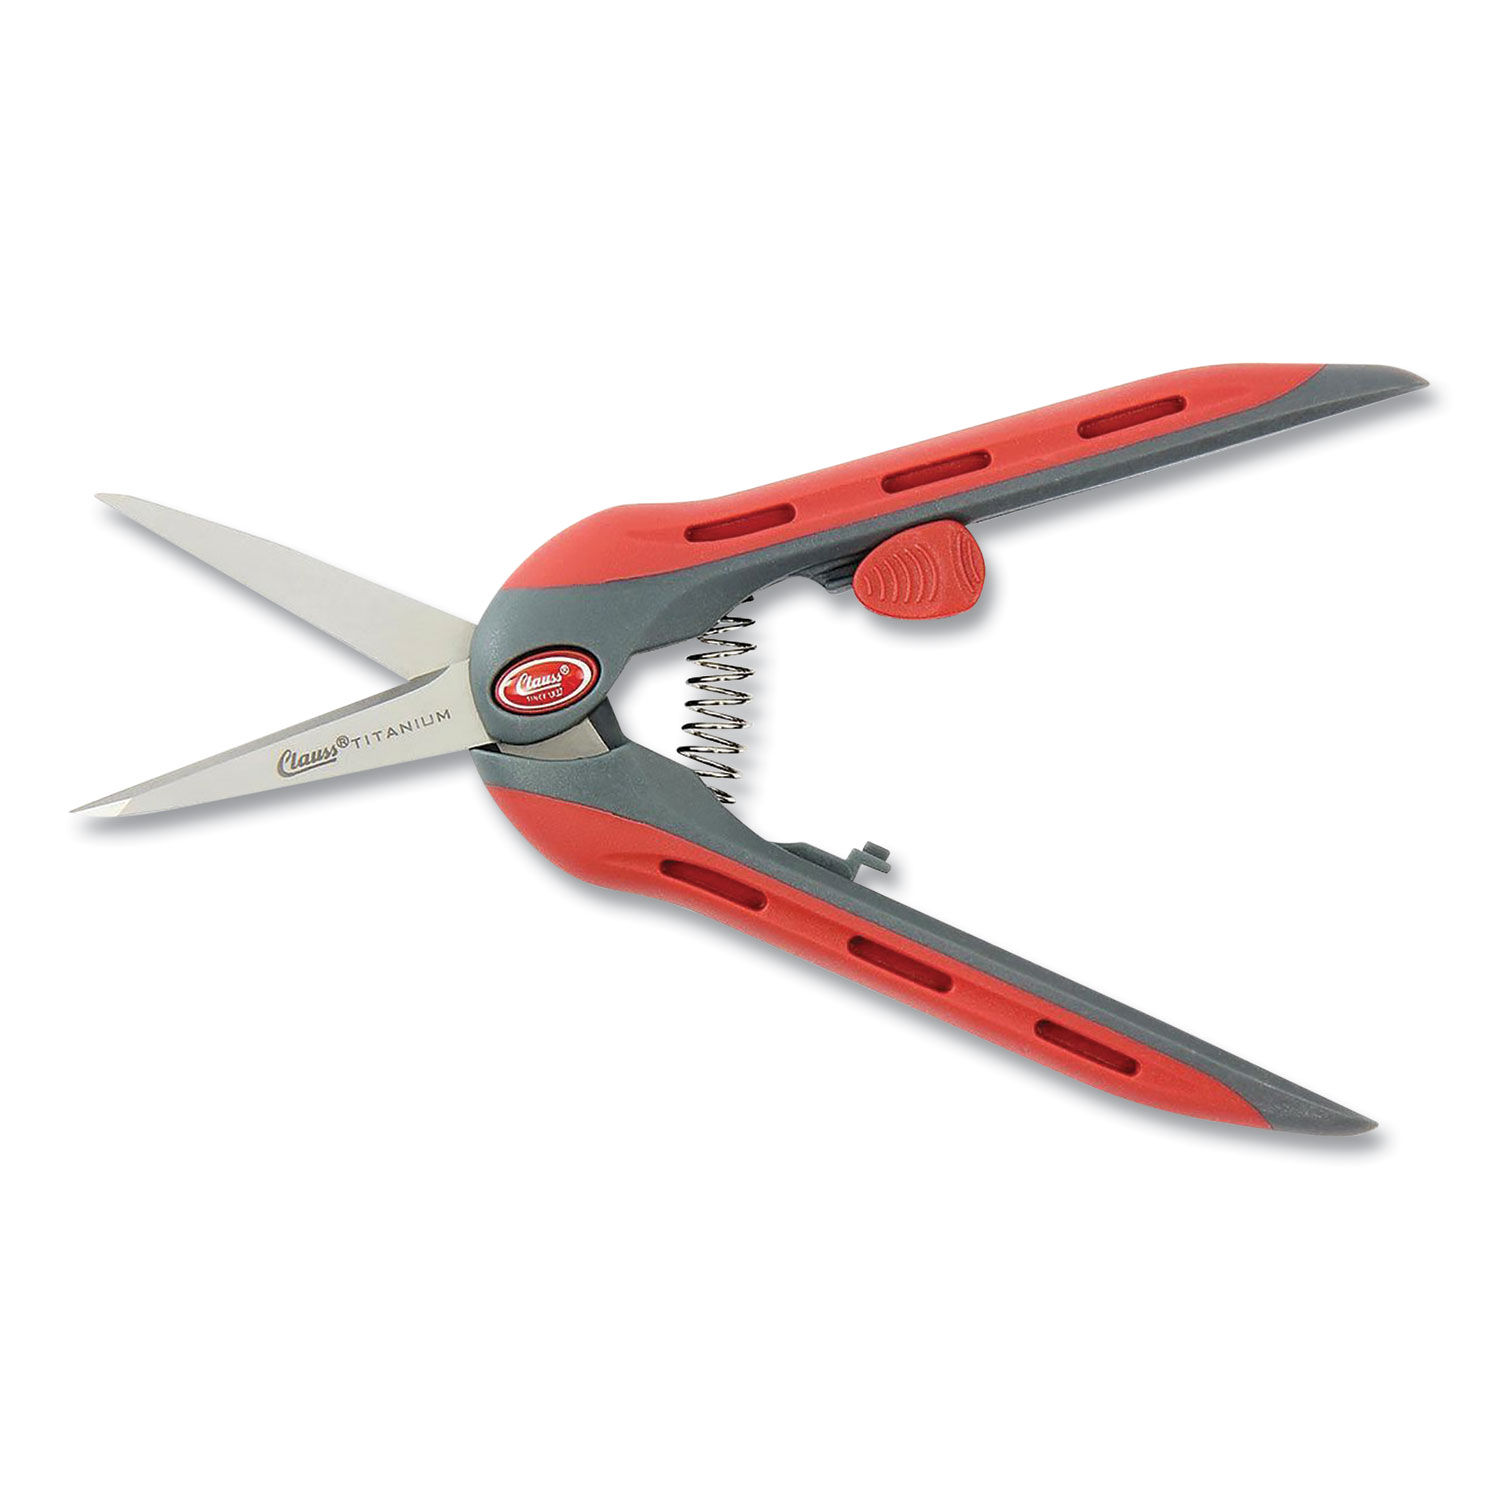 Titanium Ultra Smooth Spring Assisted Scissors Pointed Tip, 6" Long, 1.75" Cut Length, Red/Gray Straight Handle